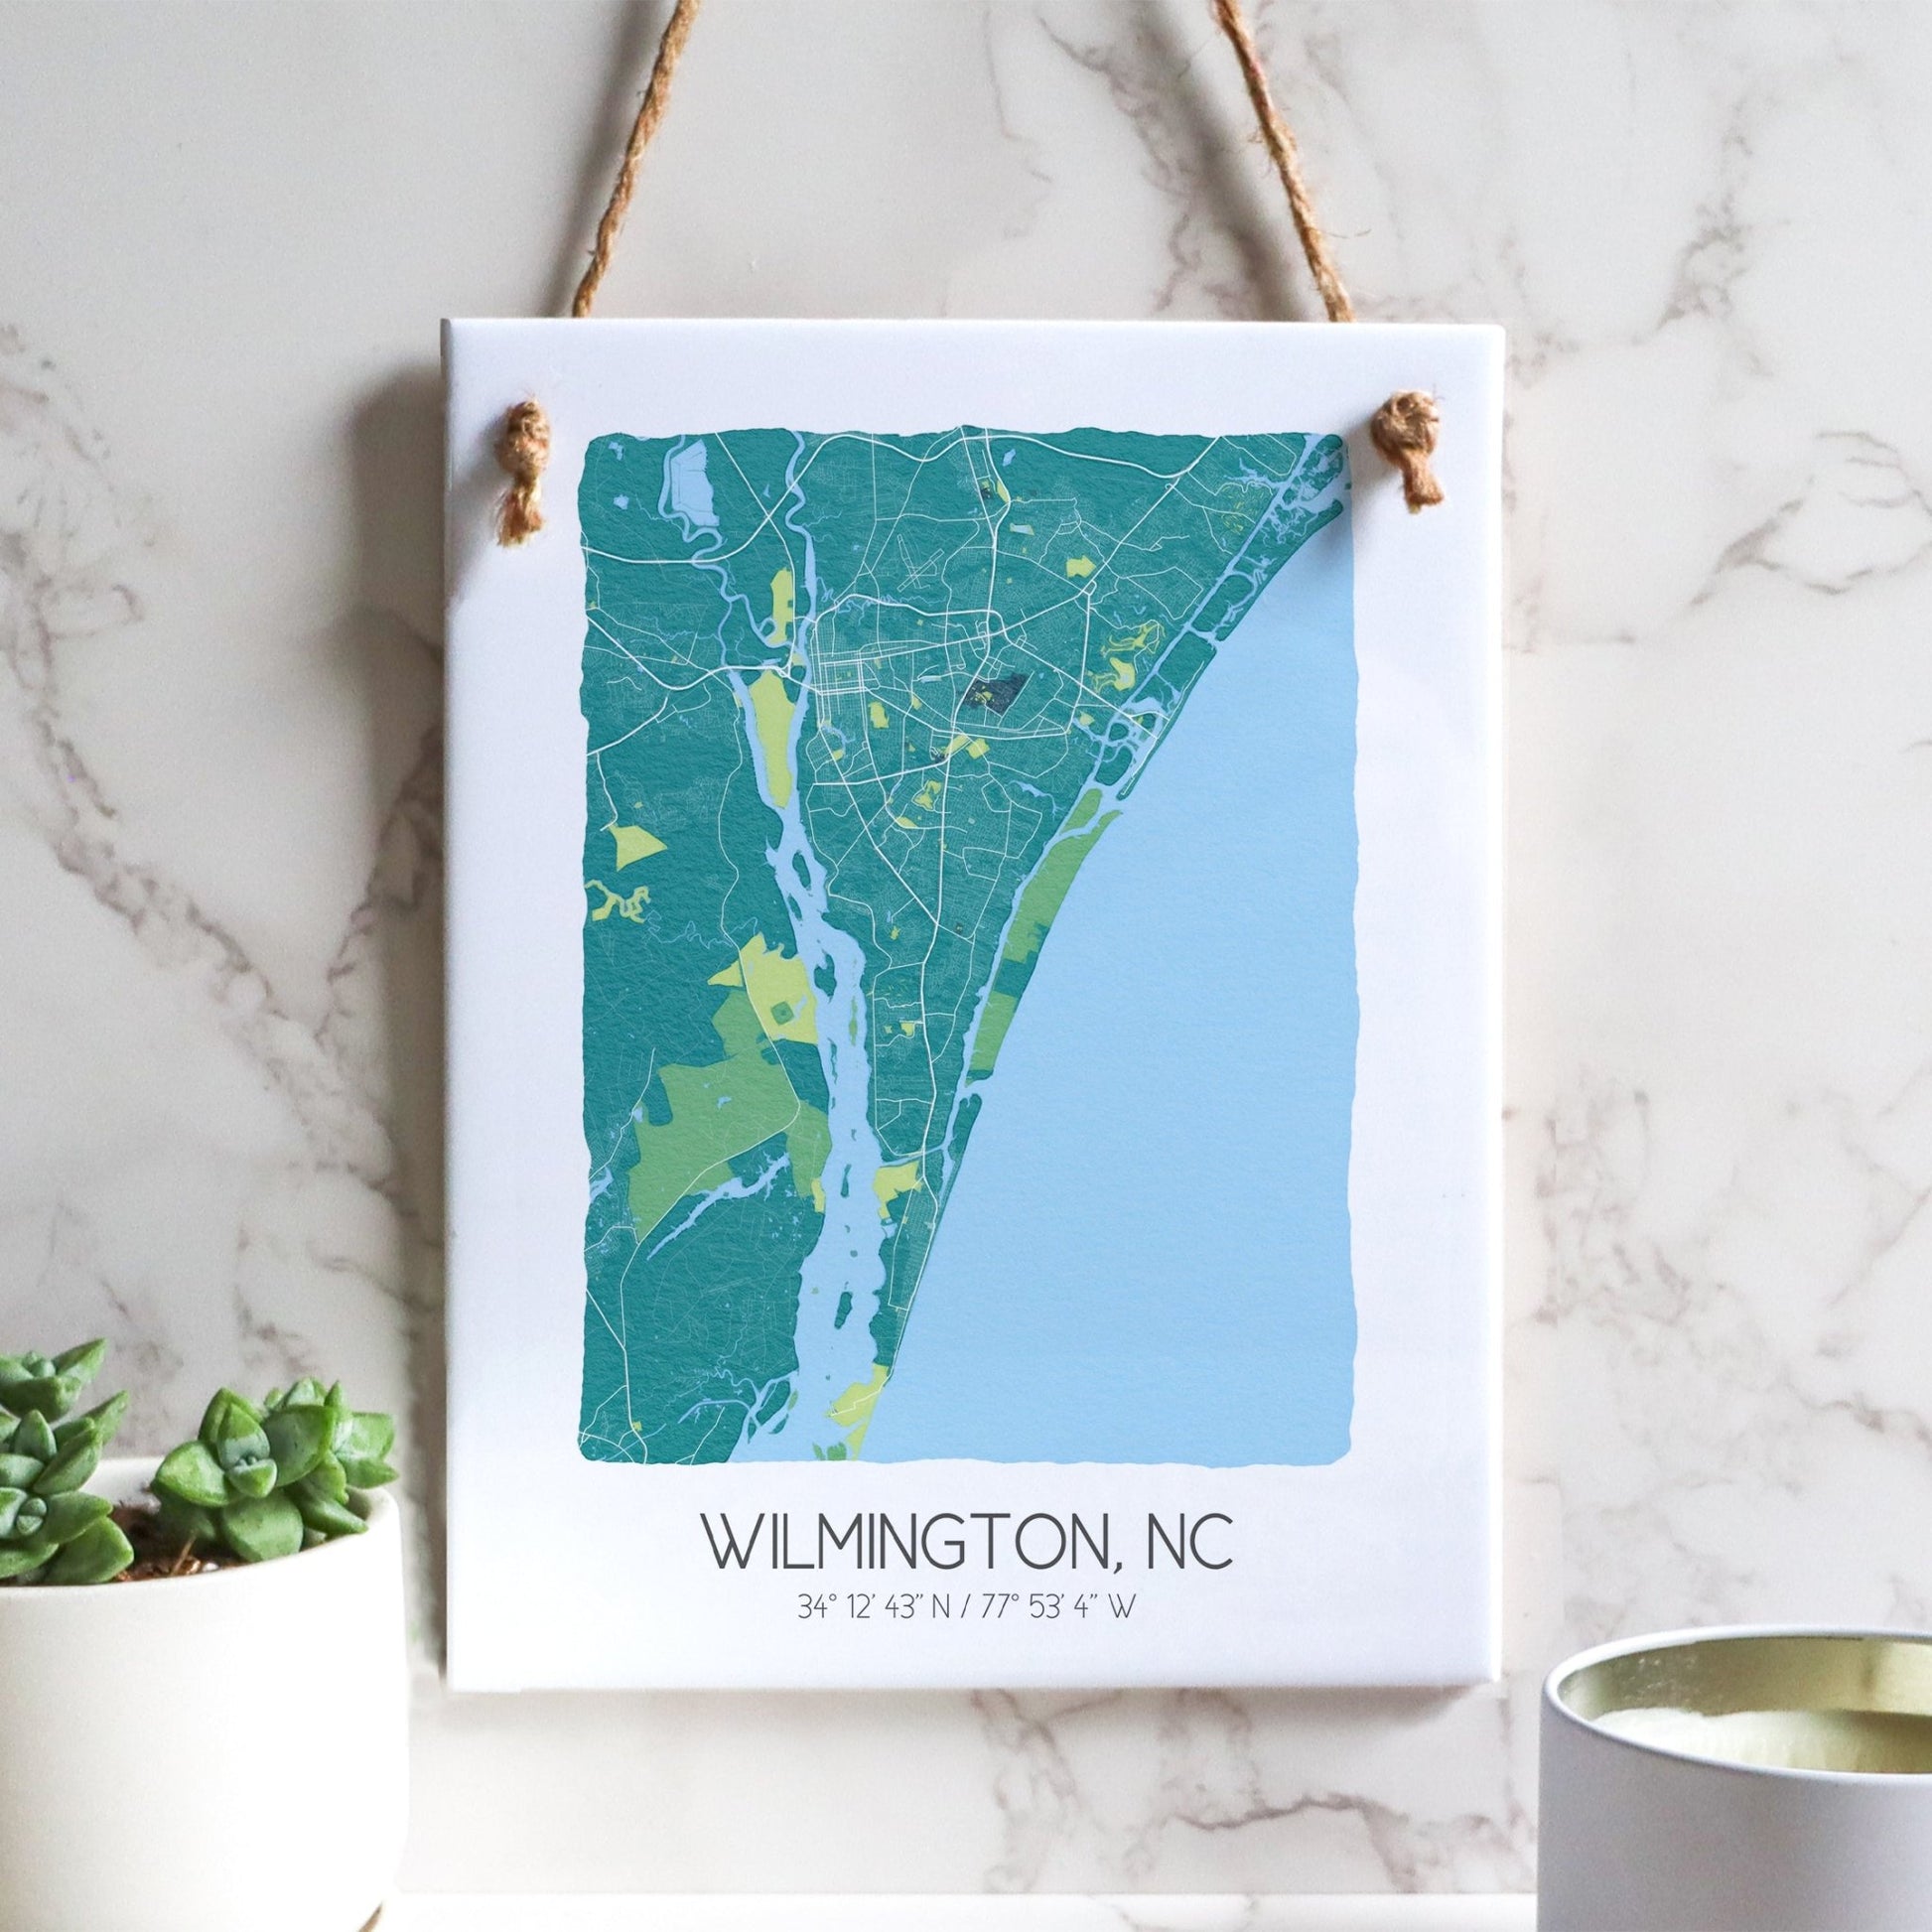 A Wilmington NC city map on a ceramic rectangle tile sign hanging on a wall, in teal